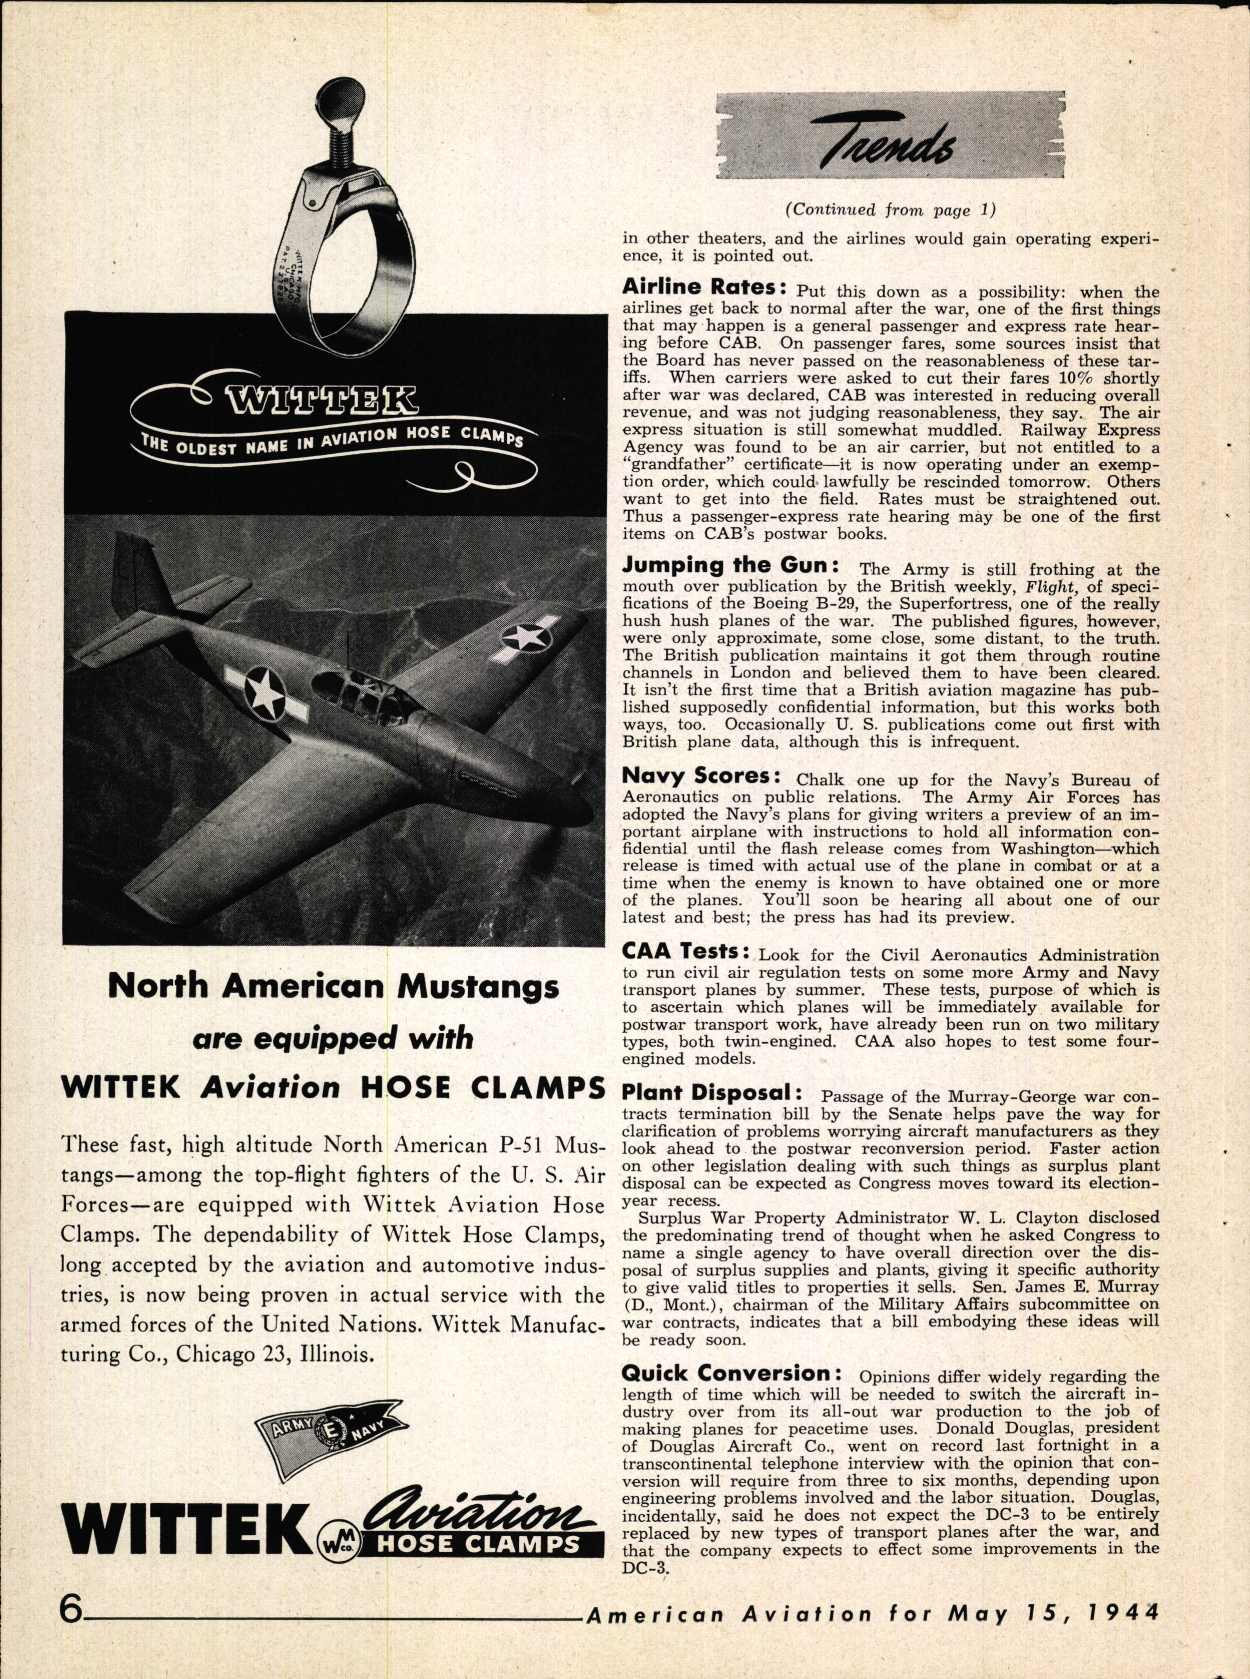 Sample page 6 from AirCorps Library document: American Aviation Magazine - Volume 7 - No. 24